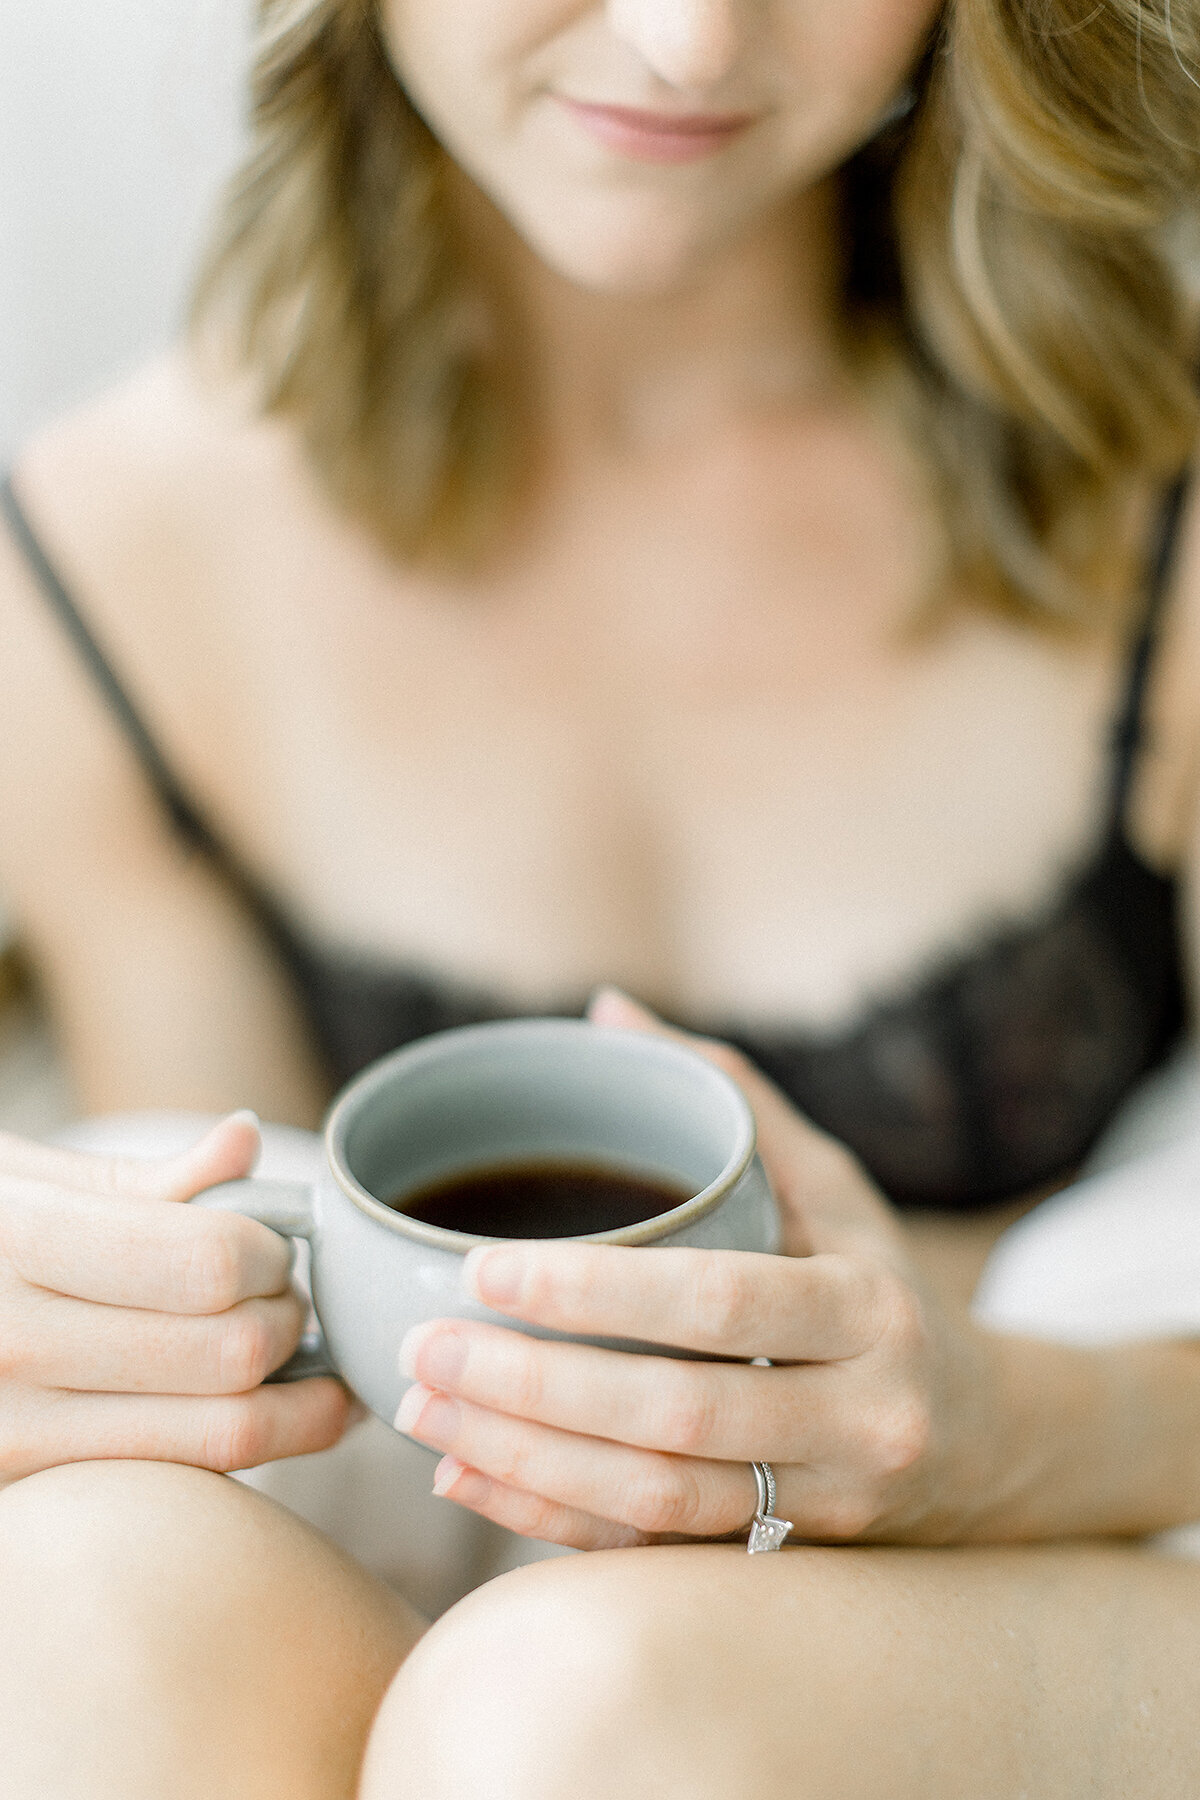 Close up detail boudoir portrait of a woman holding a cup of coffee while she is dressed in a set of black lace lingerie.